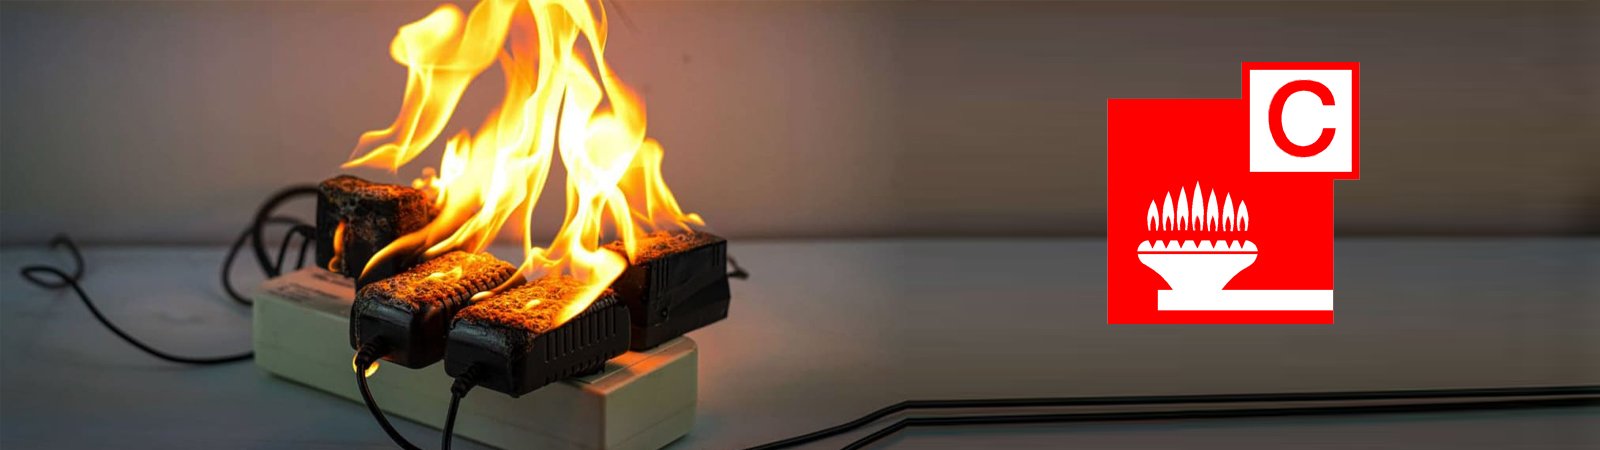 What Is A Class C Fire? How to Prevent Class C Fire